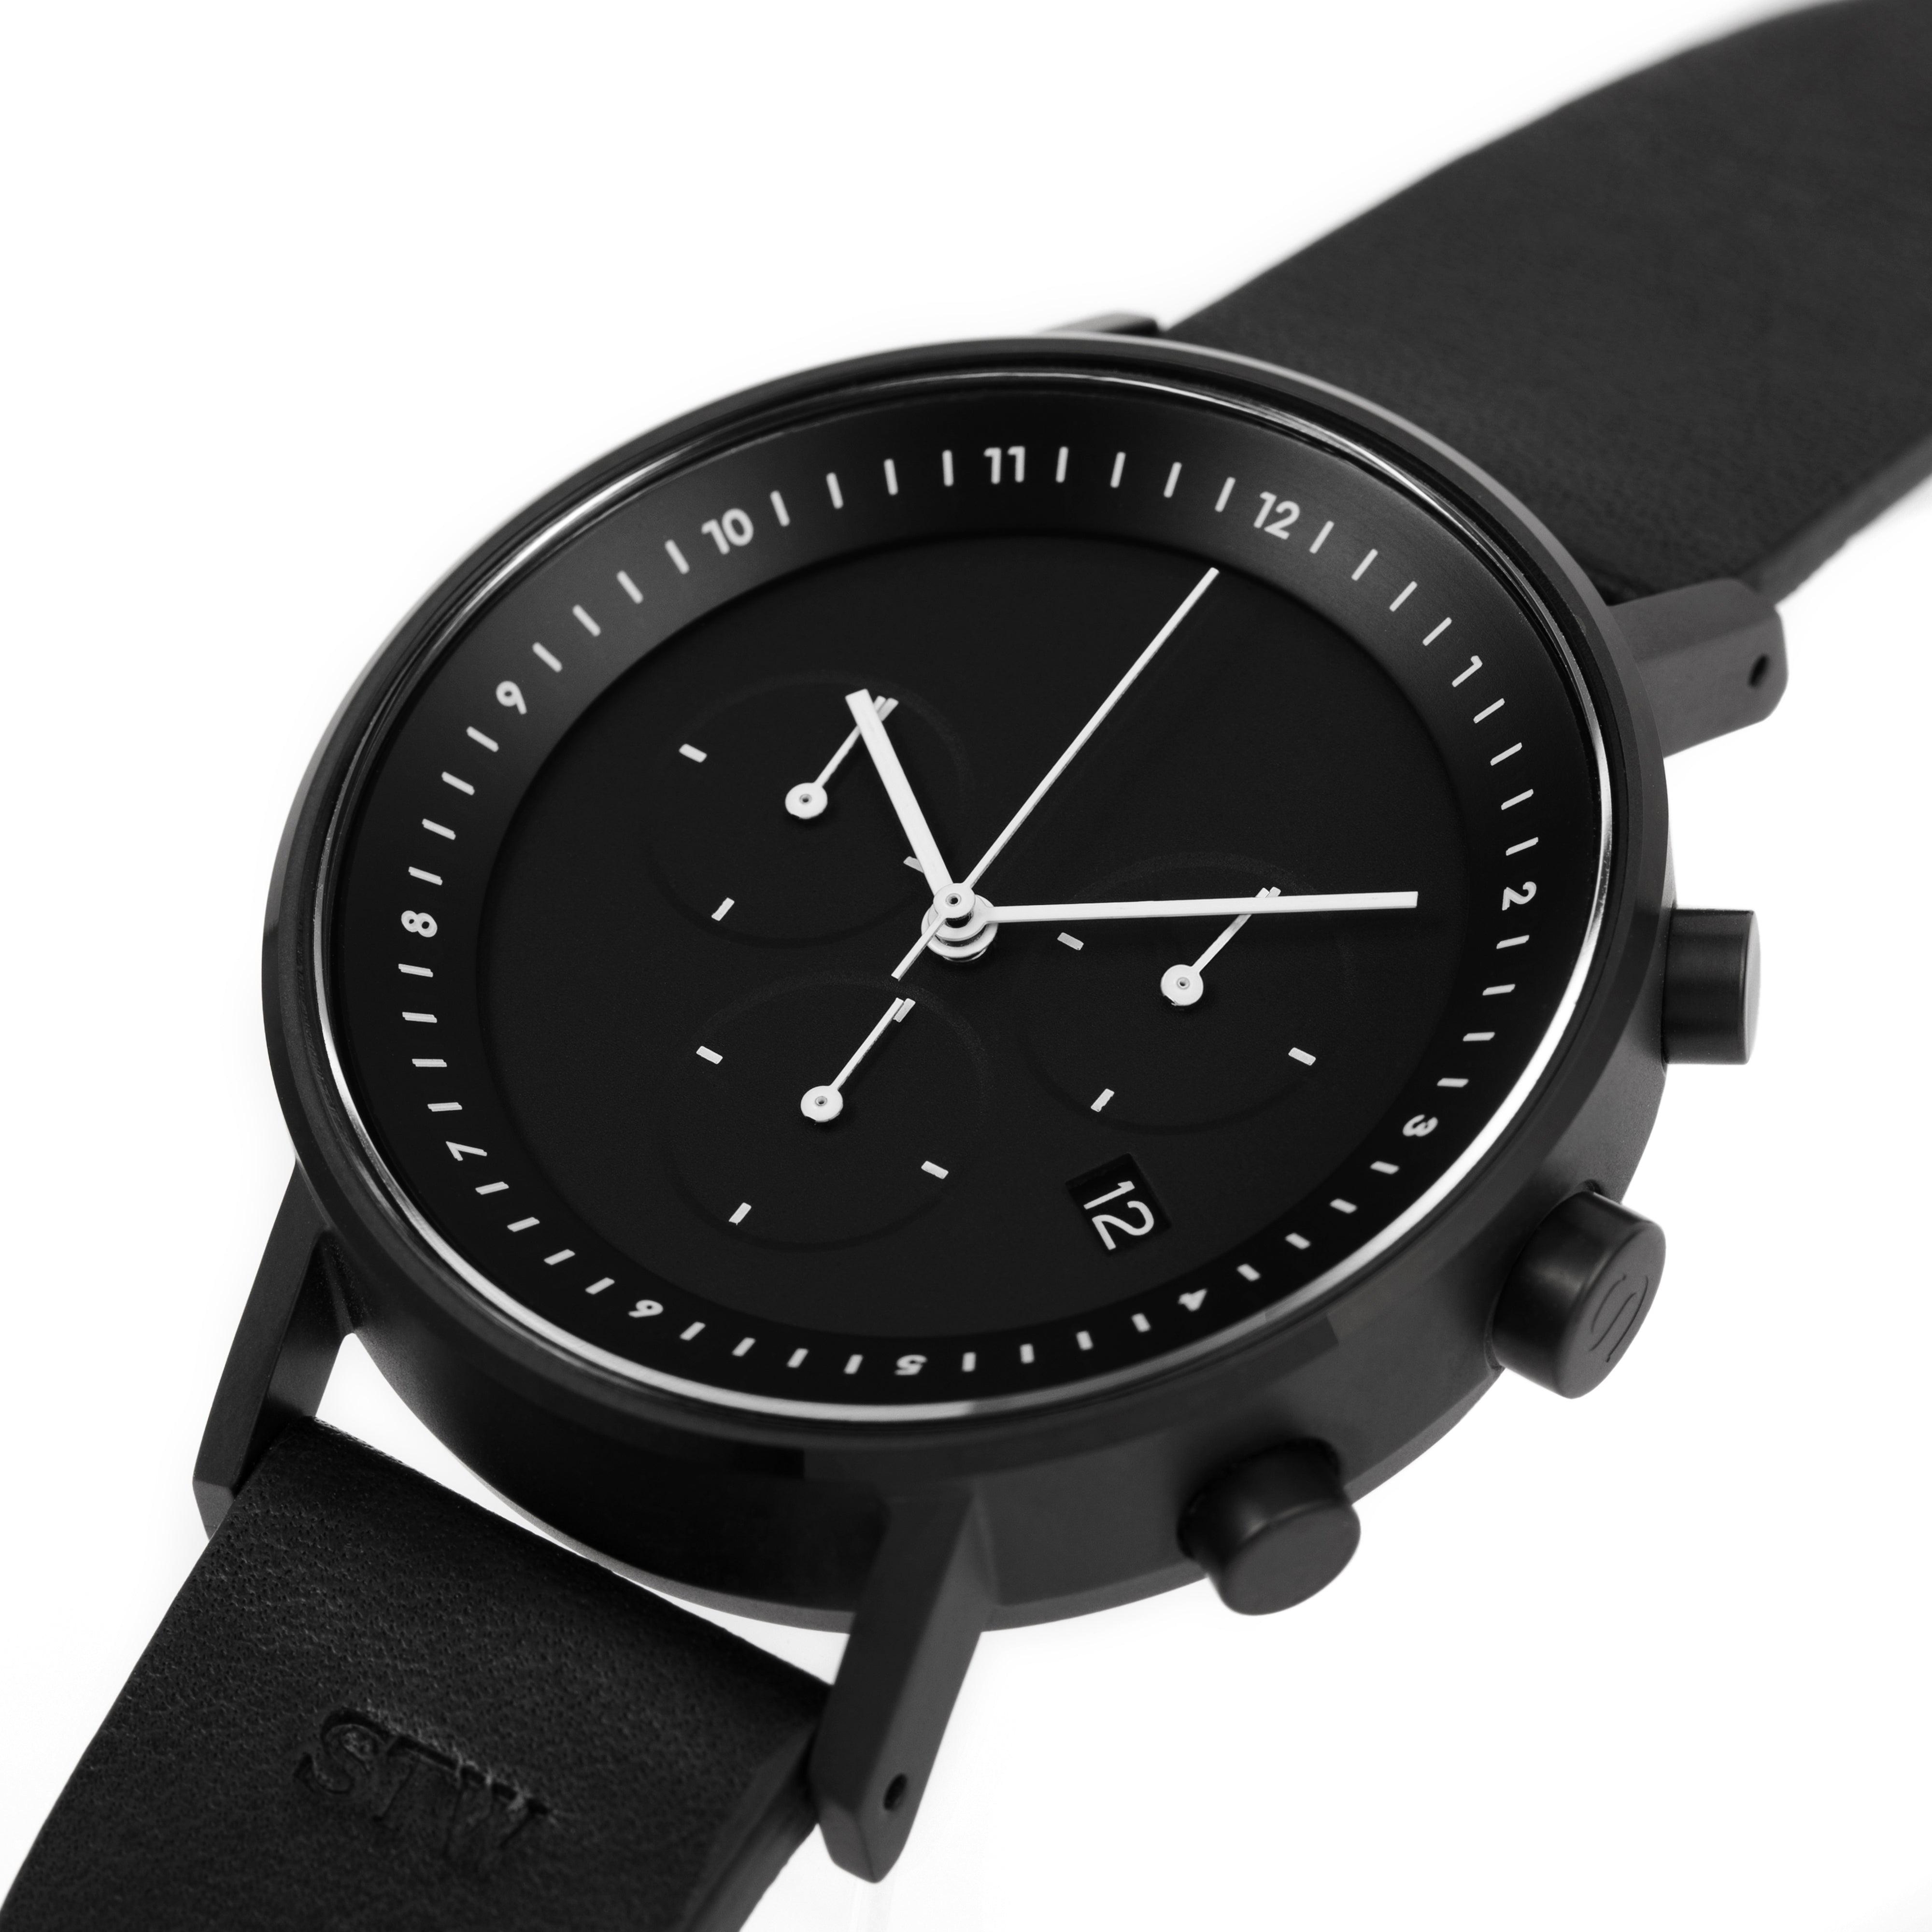 THE CHRONO - BLACK DIAL WITH BLACK LEATHER STRAP WATCH